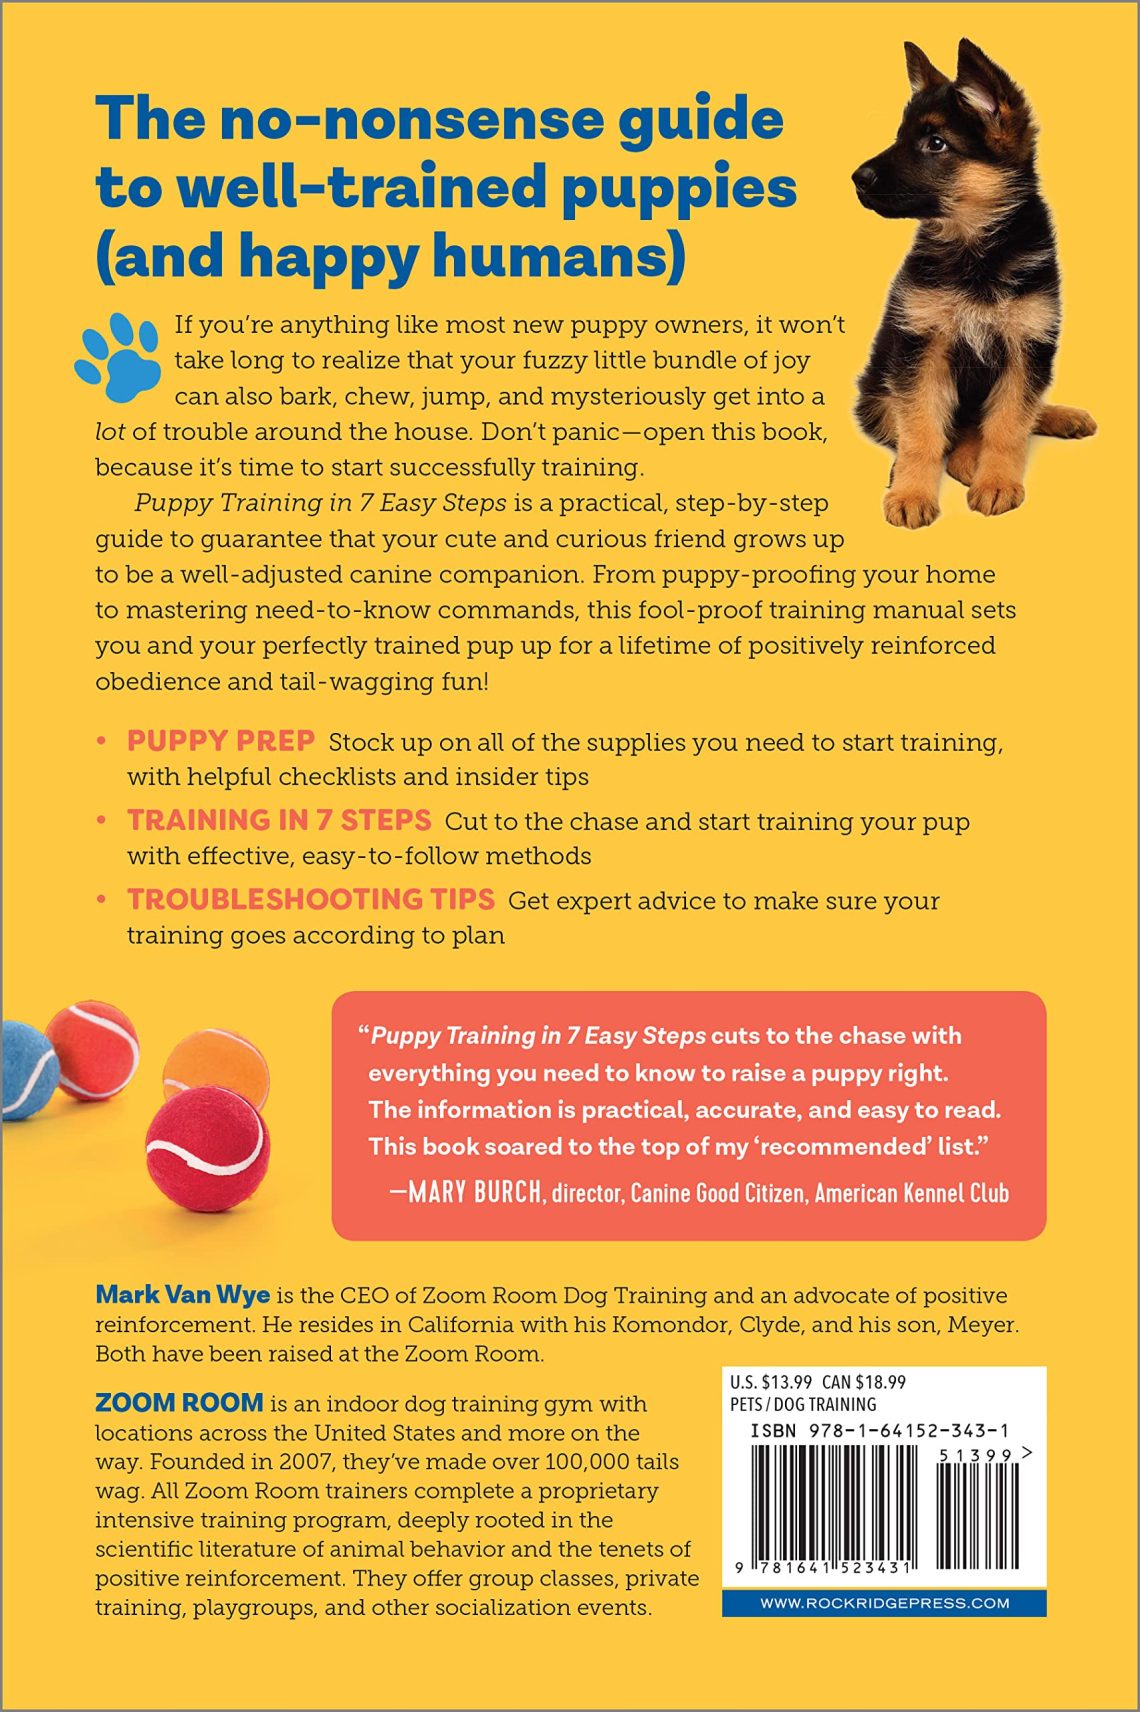 Tips for Proper Home Puppy Training